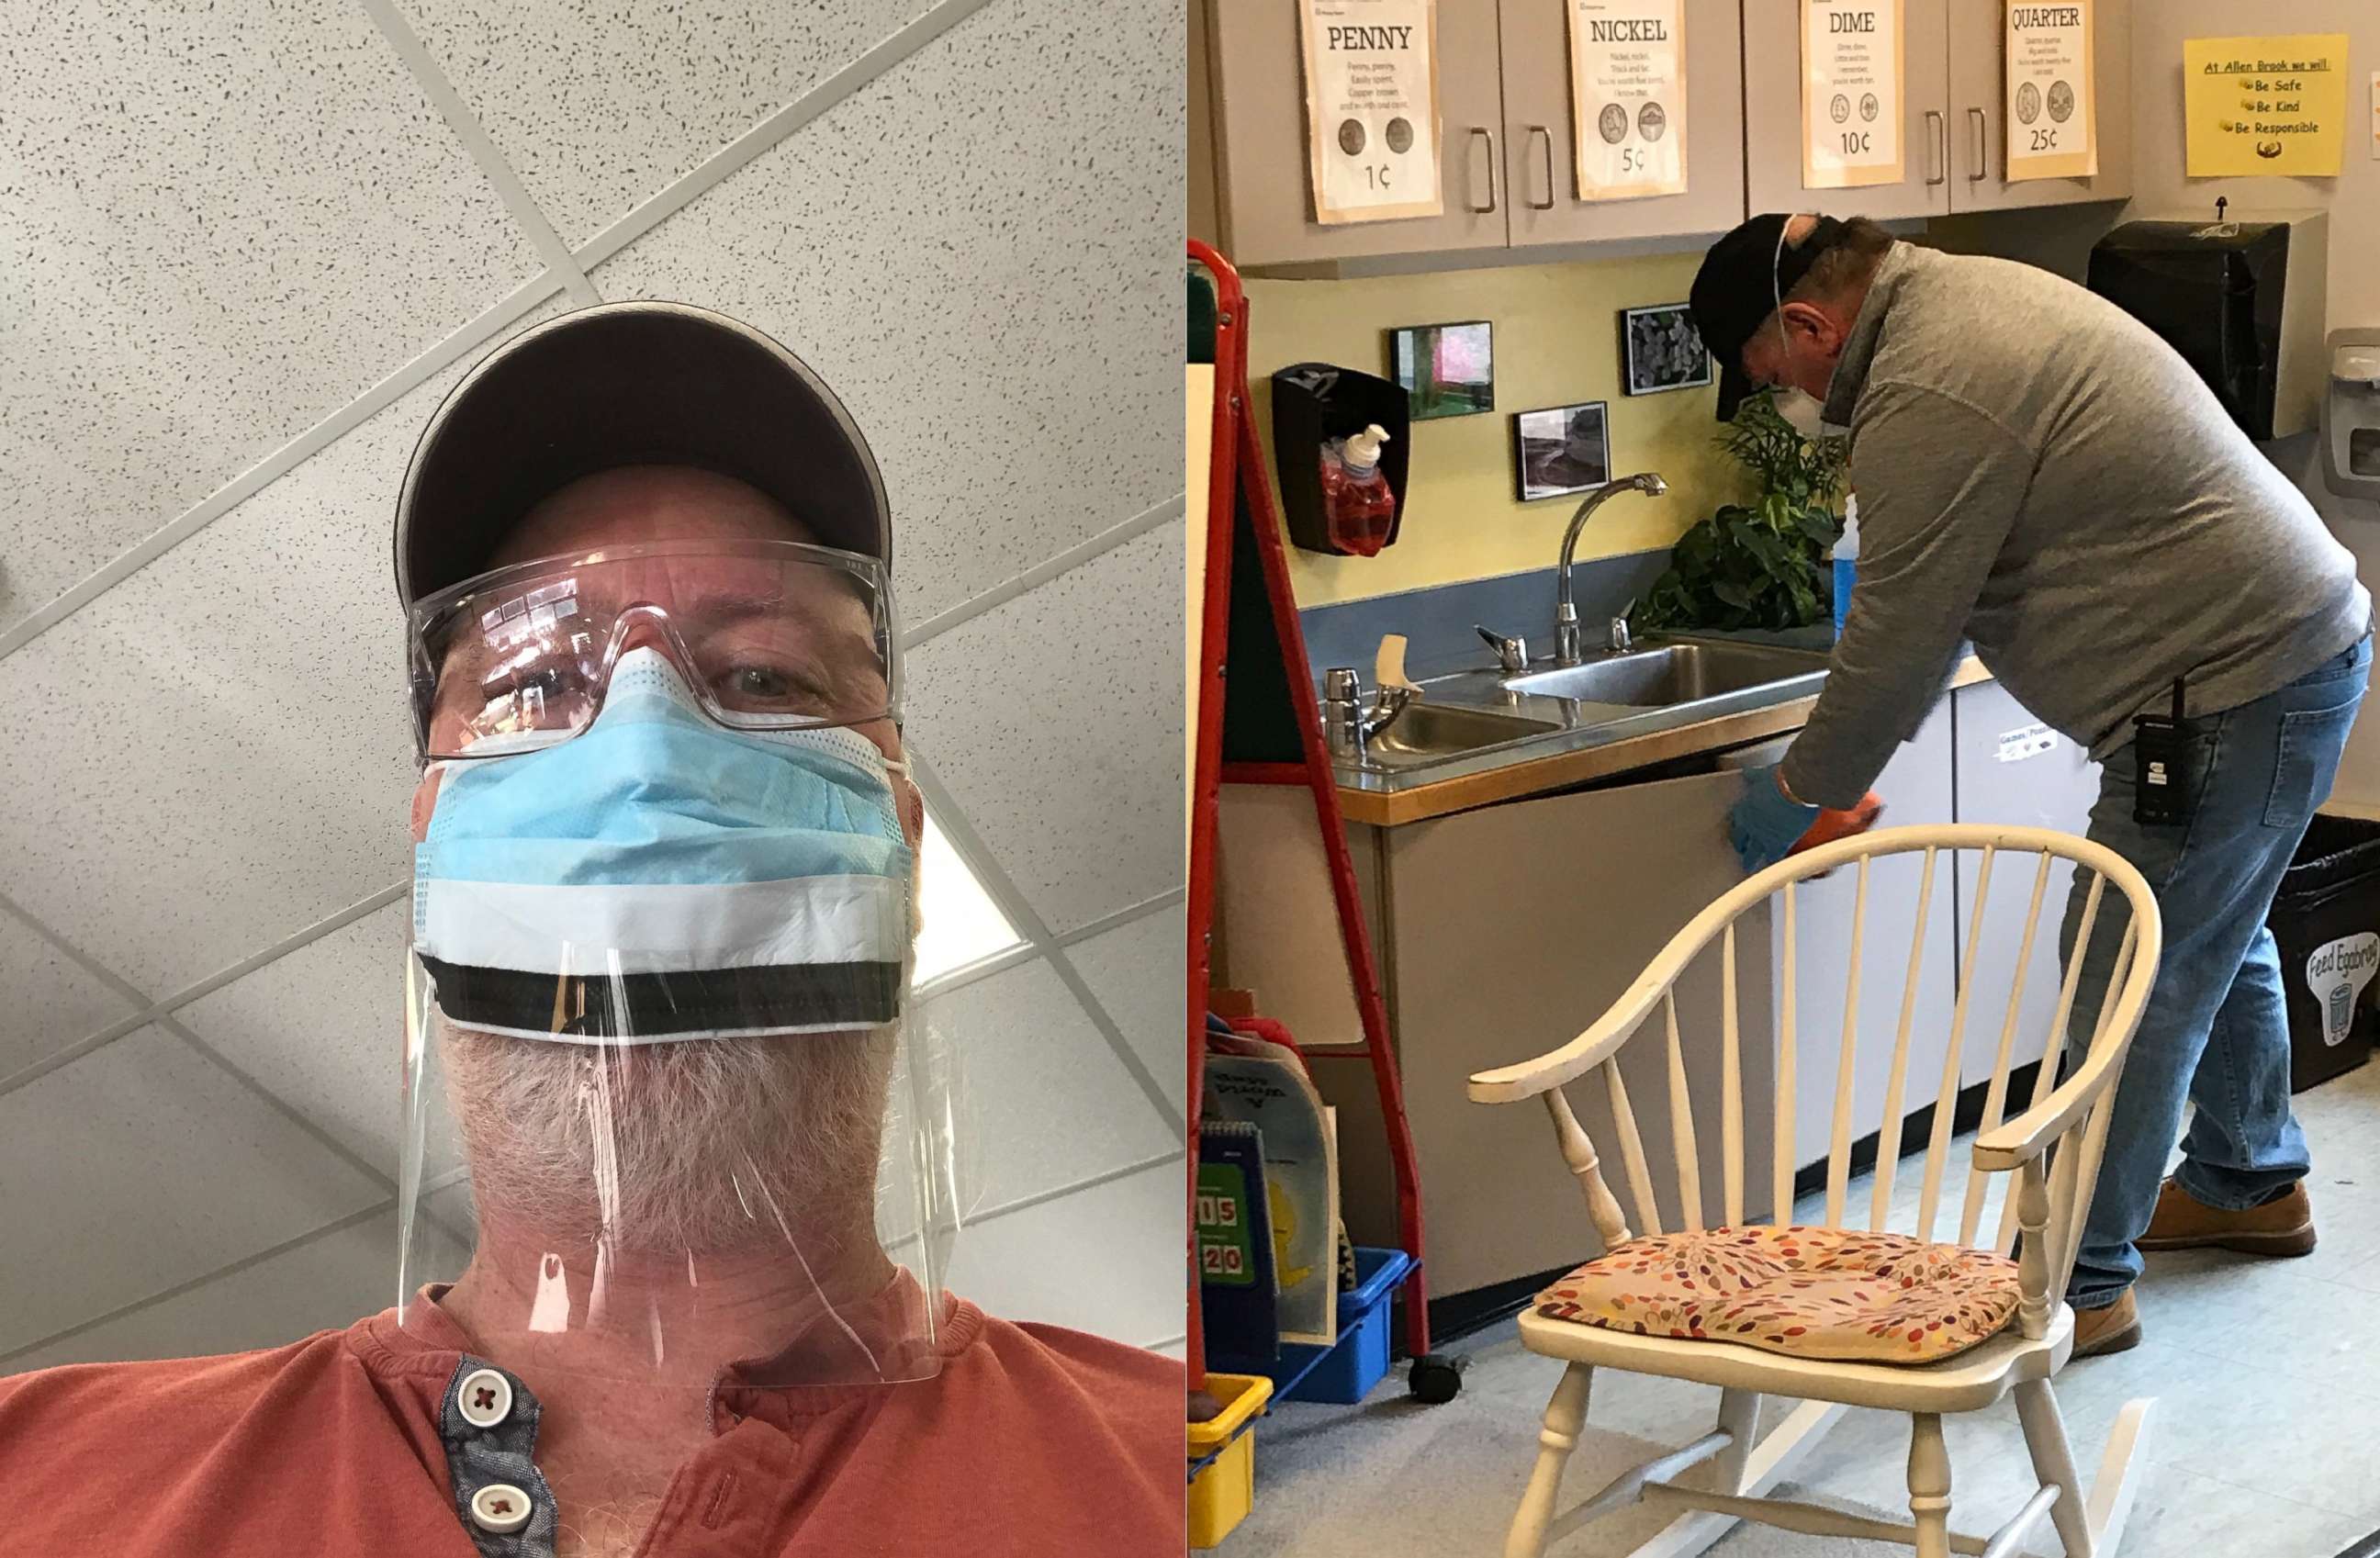 PHOTO: Lyall Smith (left) and John Baggs (right), both custodians at Williston schools in Williston, Vermont, have been cleaning and sanitizing doorknobs, carpets, floors, lockers and cubbies amid the novel coronavirus outbreak.